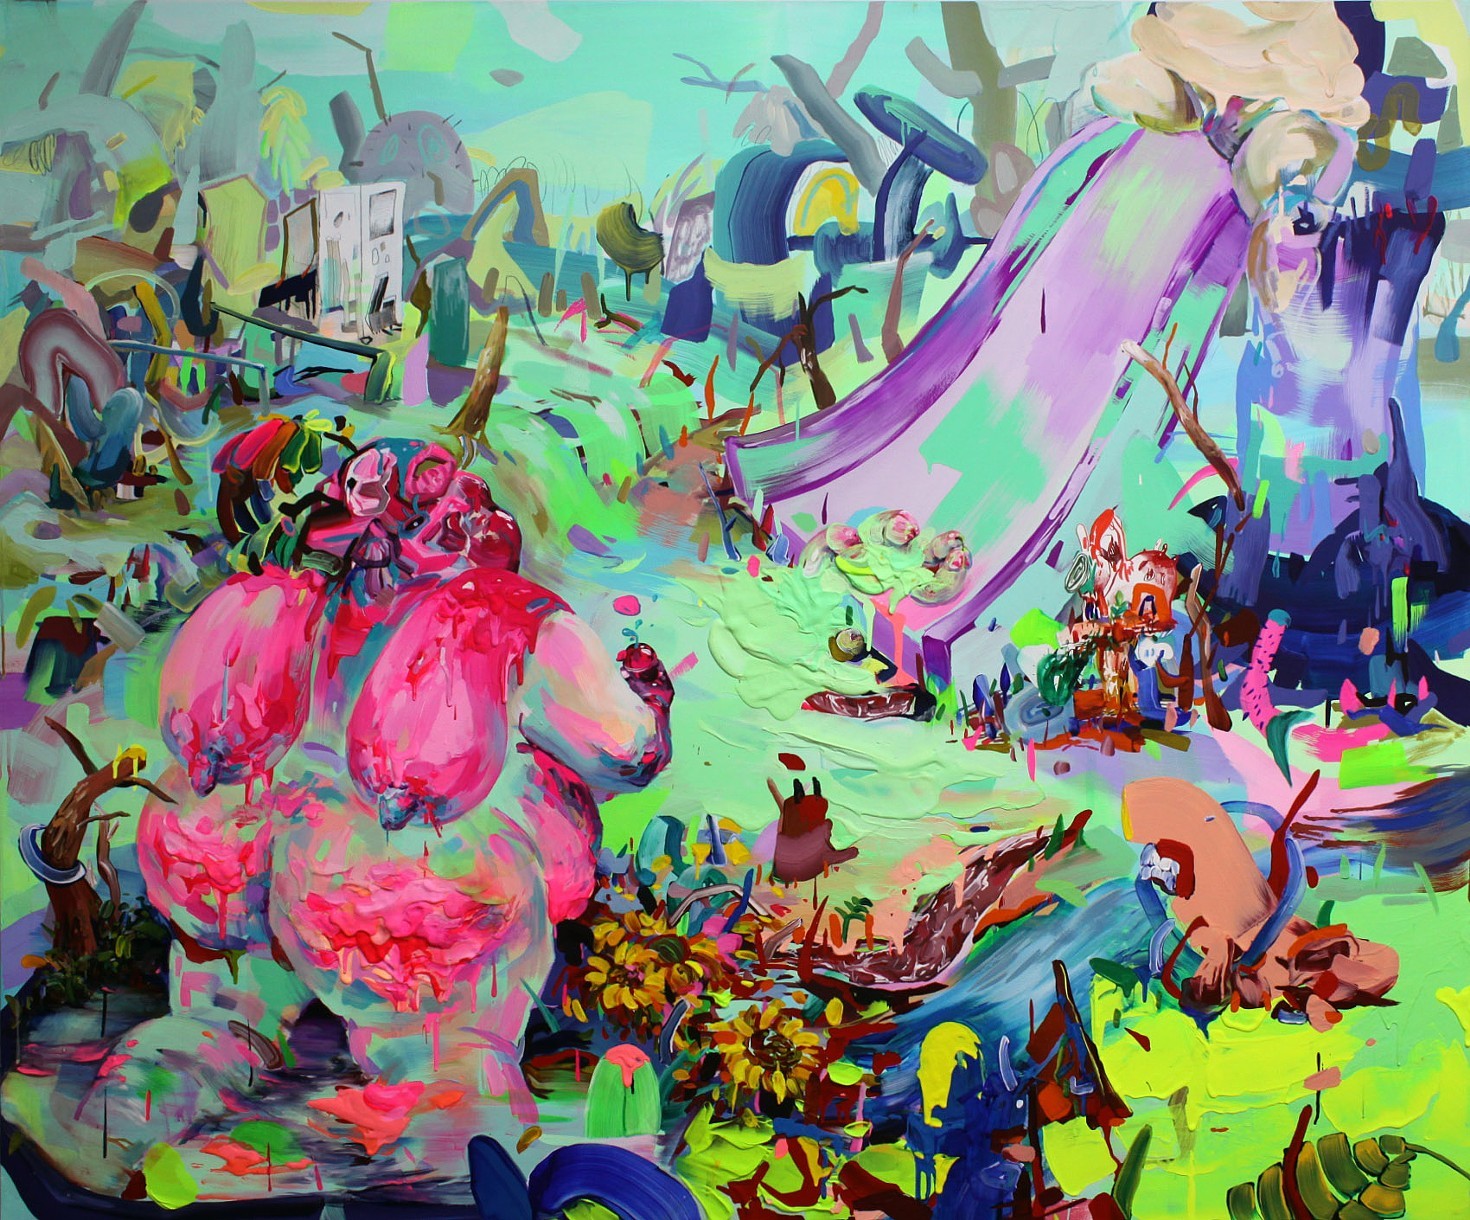 Image: "Booty Booby Call" features a very colorful, very neon painting. It is a landscape with various shapes with many colors including neon green, pink, red, purple and teal all around the composition. A colorful bright pink figure with breasts is facing away from the viewer on the left hand side. The breasts are thrown over the shoulders and resting on the back. There are sunflowers and trees surrounding the figure and dotted throughout the landscape. Image courtesy of the artist.